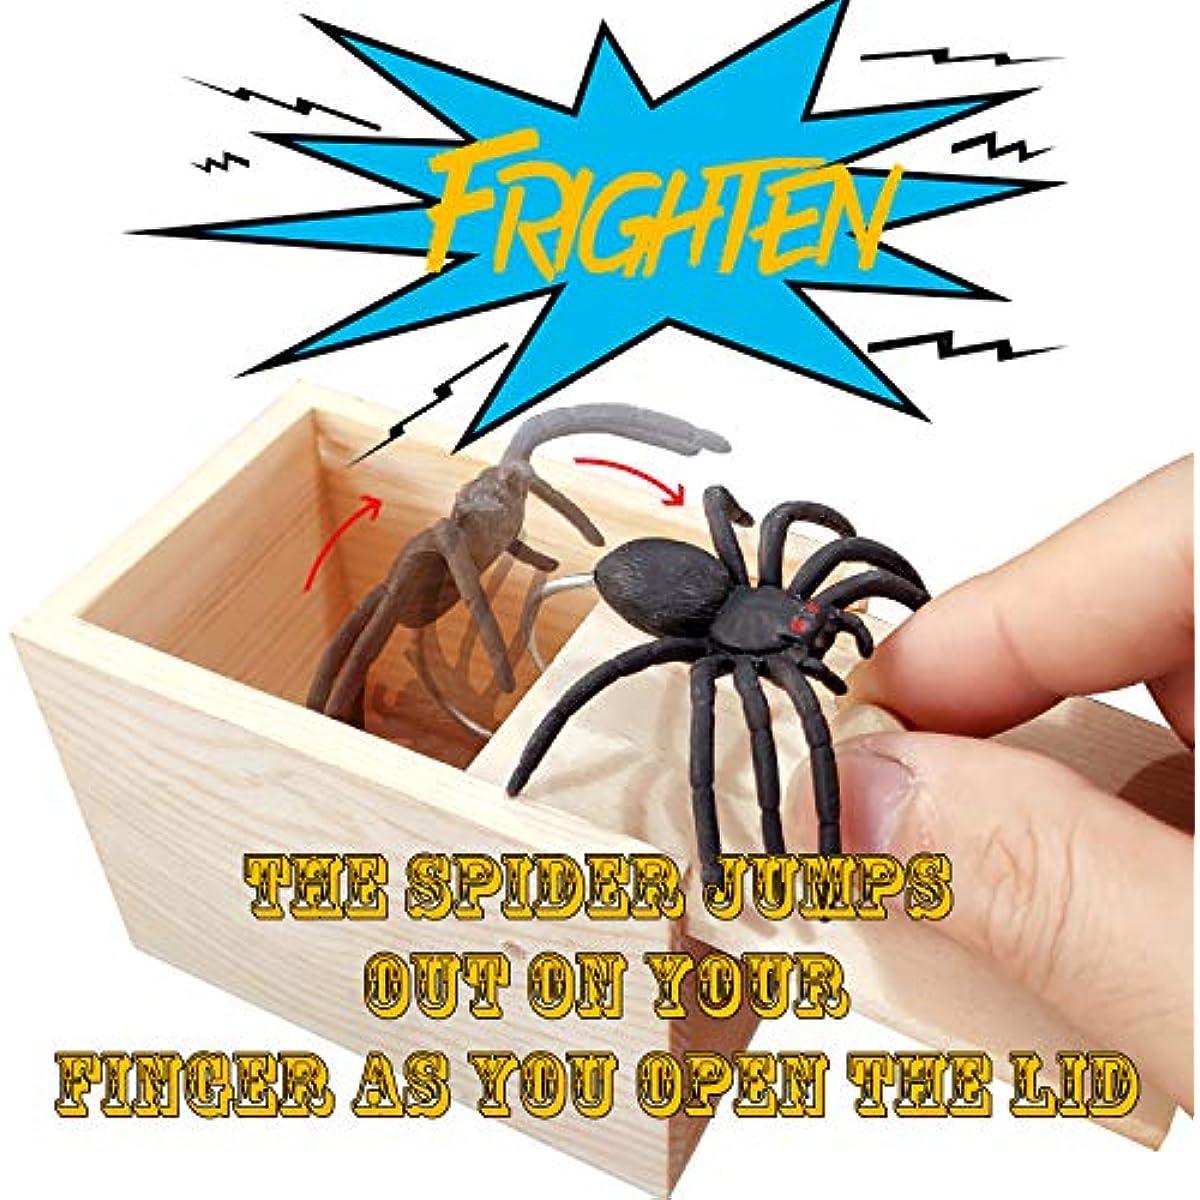 Handcrafted Solid Wood Spider In Box Prank,Rubber Spider Prank Box - Cykapu